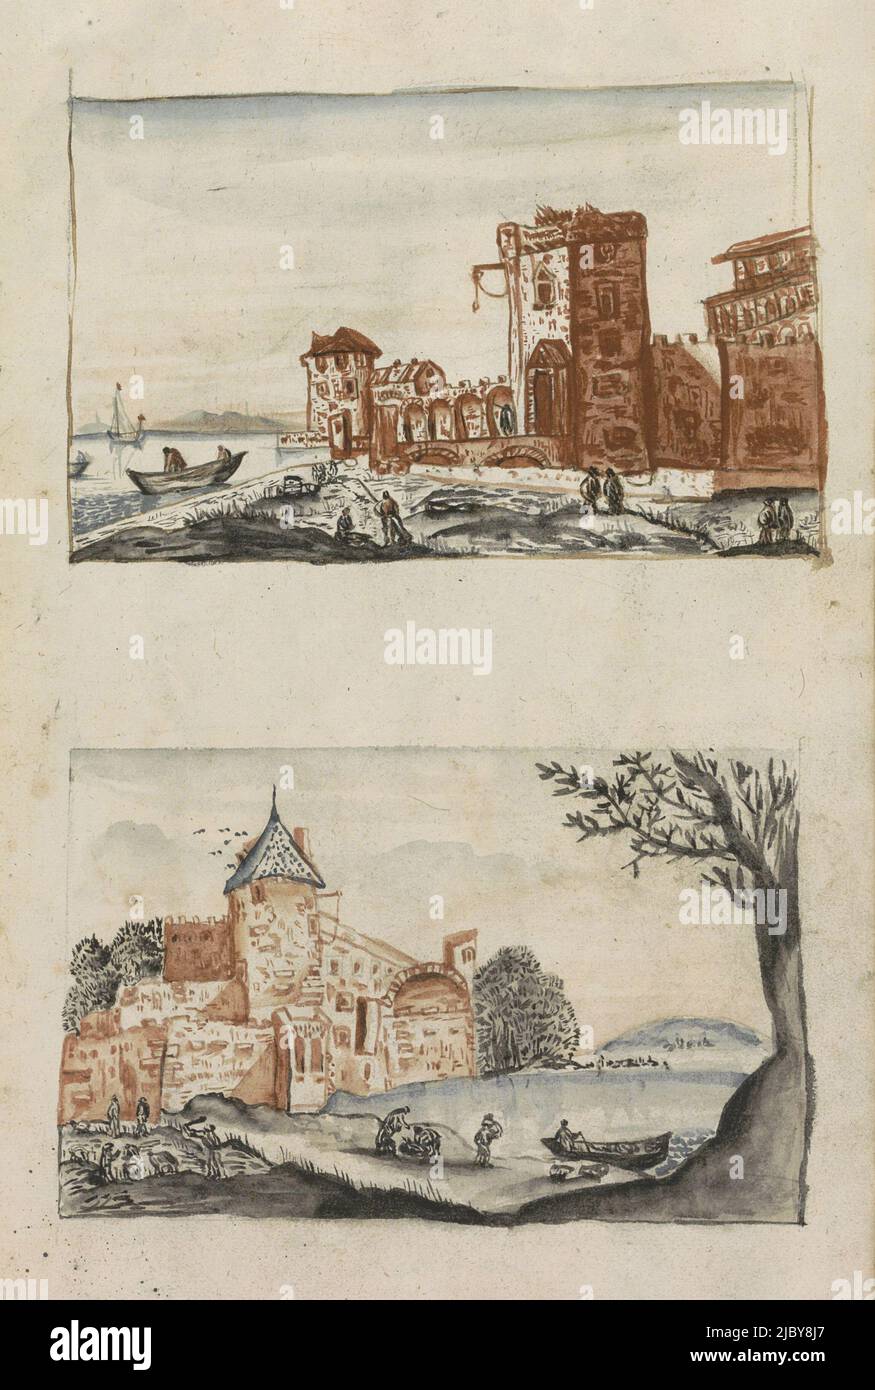 Two townscapes, Hendrick van Beaumont, 1696, Views of two waterfront towns. Sheet 42 recto from a sketchbook containing 91 sheets., draughtsman: Hendrick van Beaumont, 1696, paper, brush Stock Photo